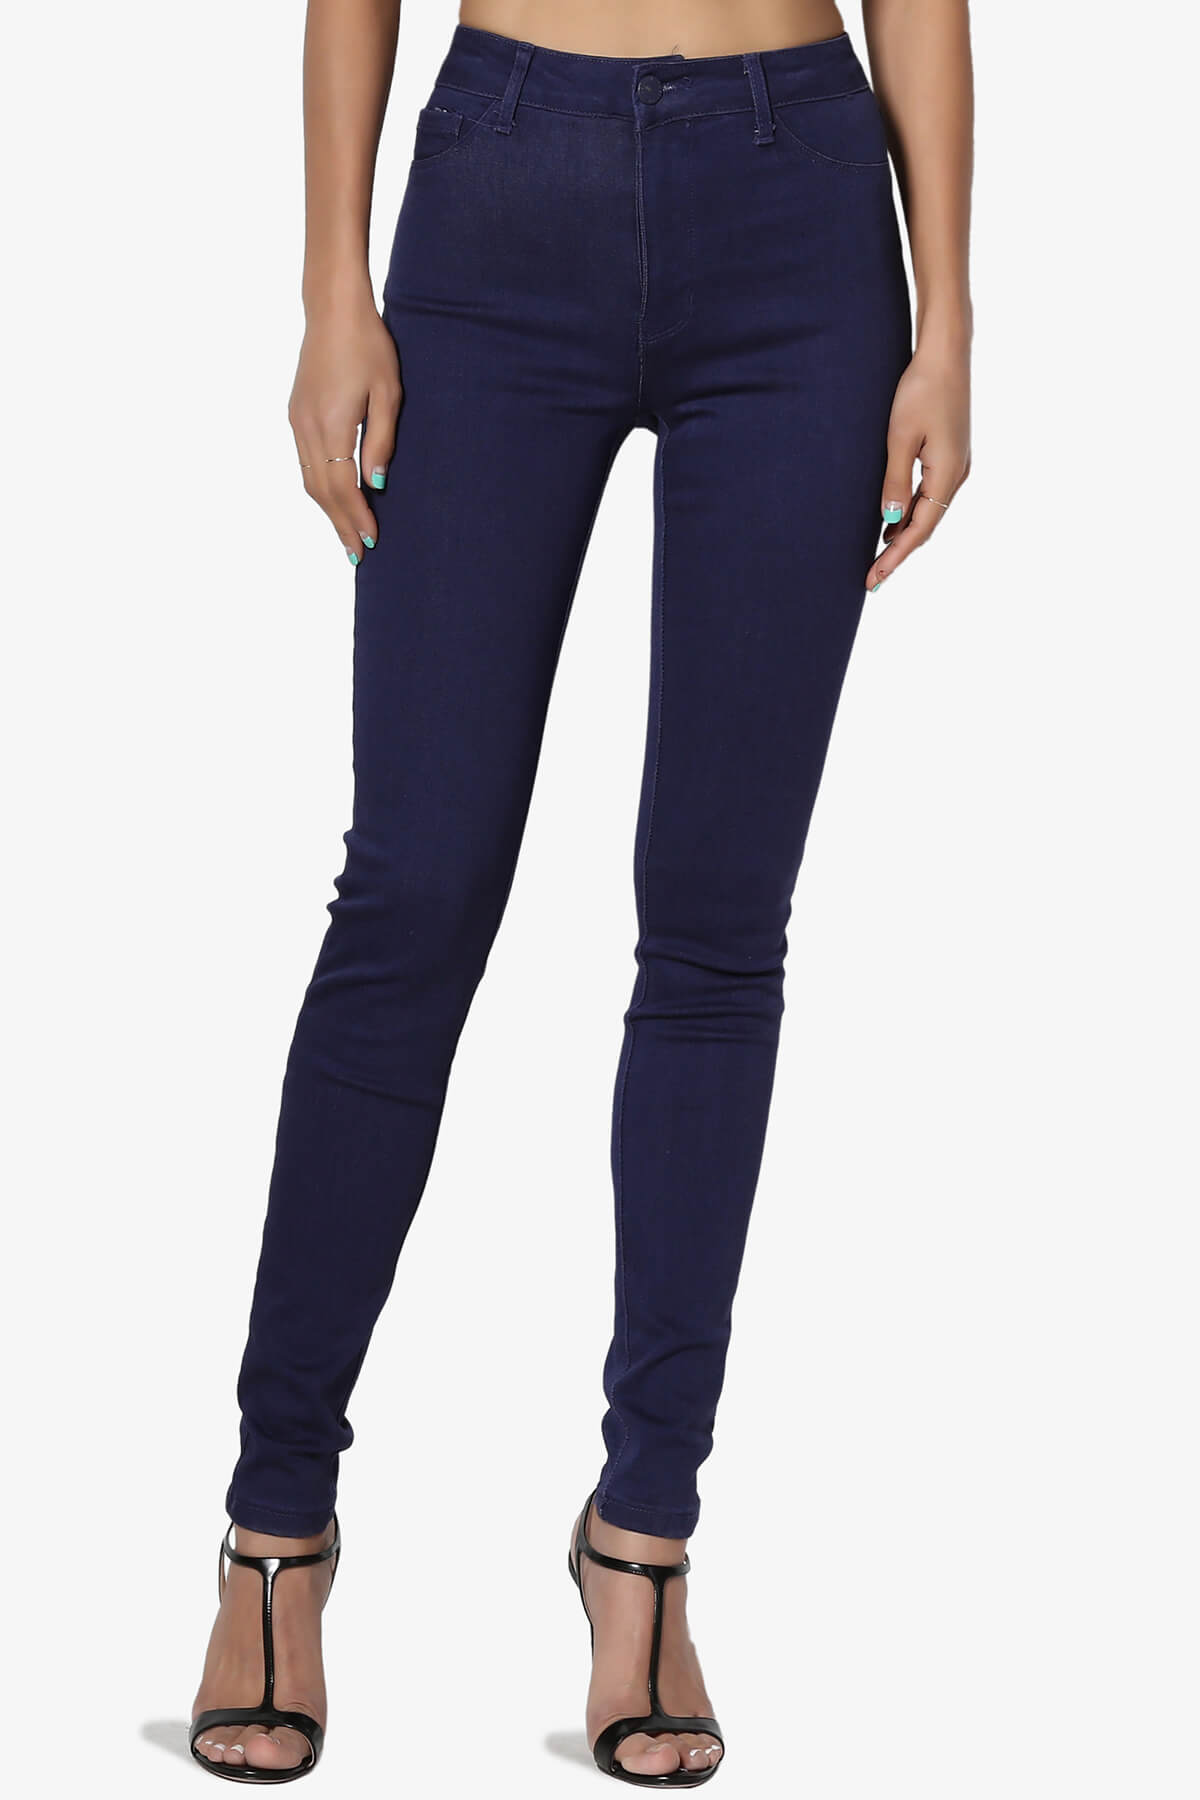 Load image into Gallery viewer, Doris High Rise Skinny Jeans NAVY_1
